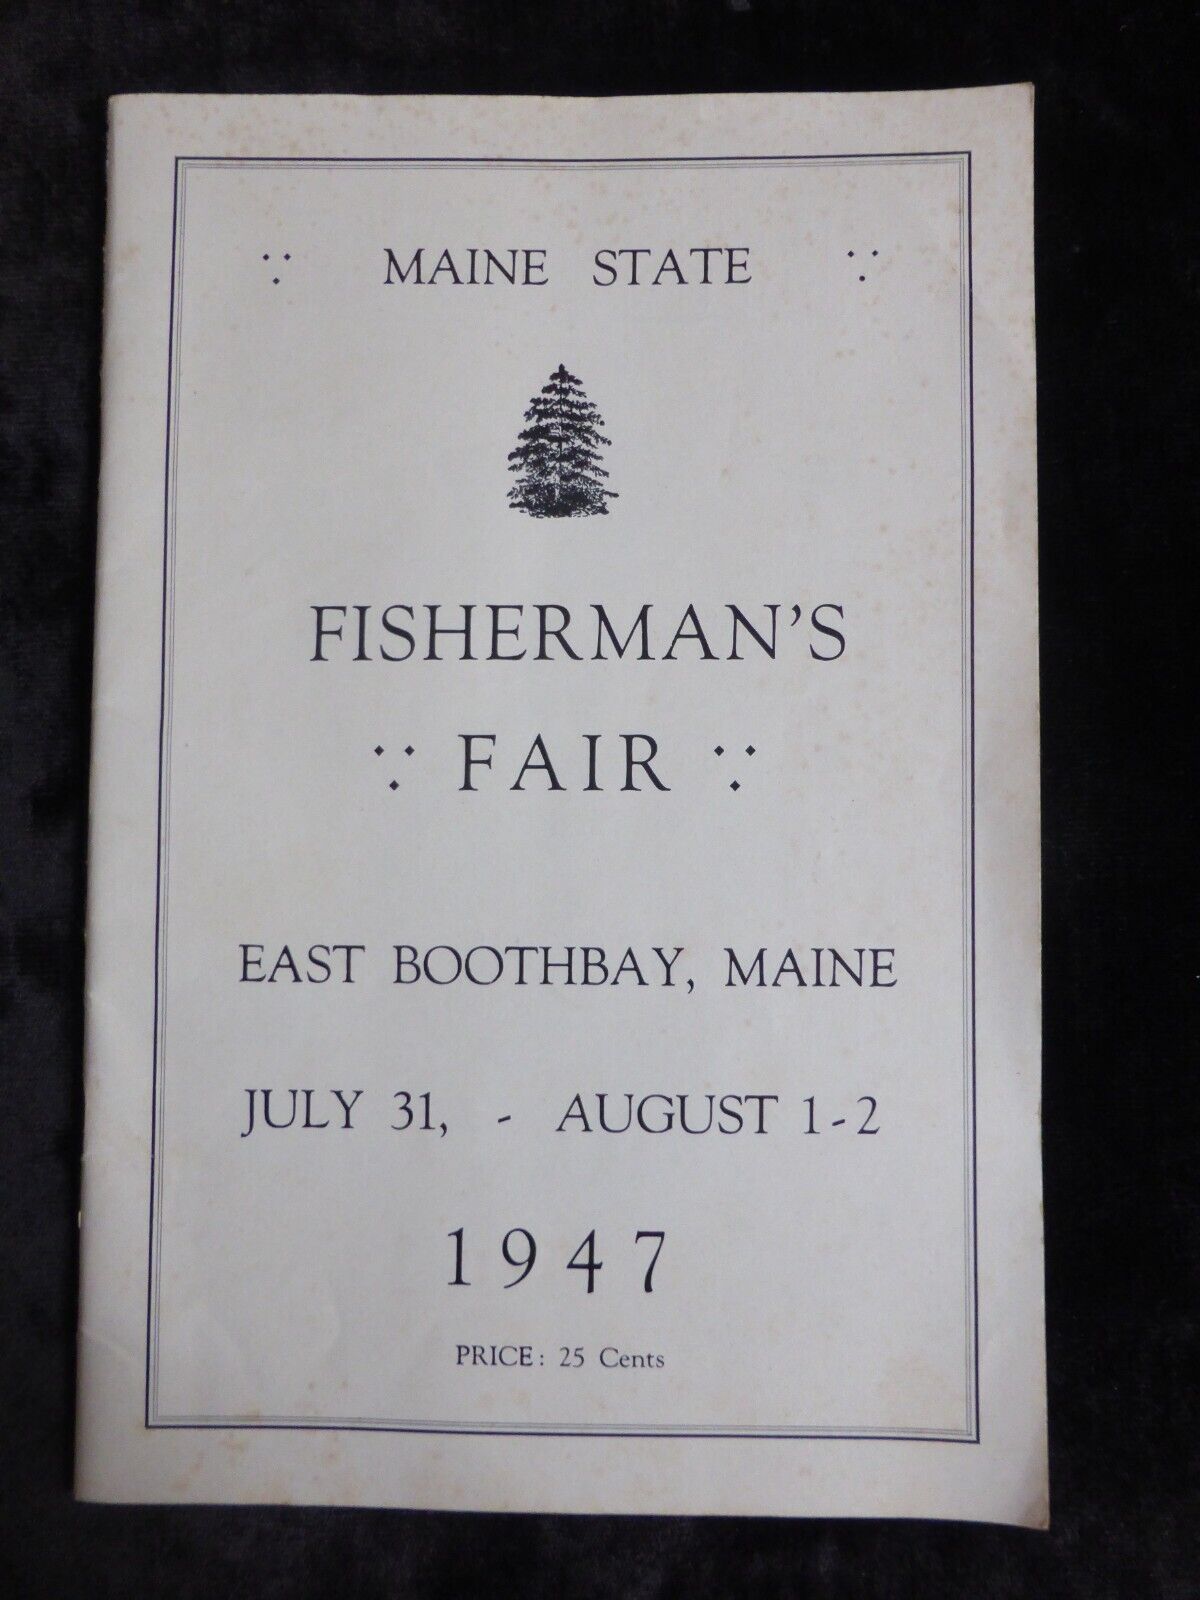 1947 MAINE STATE FISHERMANS FAIR EAST BOOTHBAY LOTS OF PHOTOS & INFO